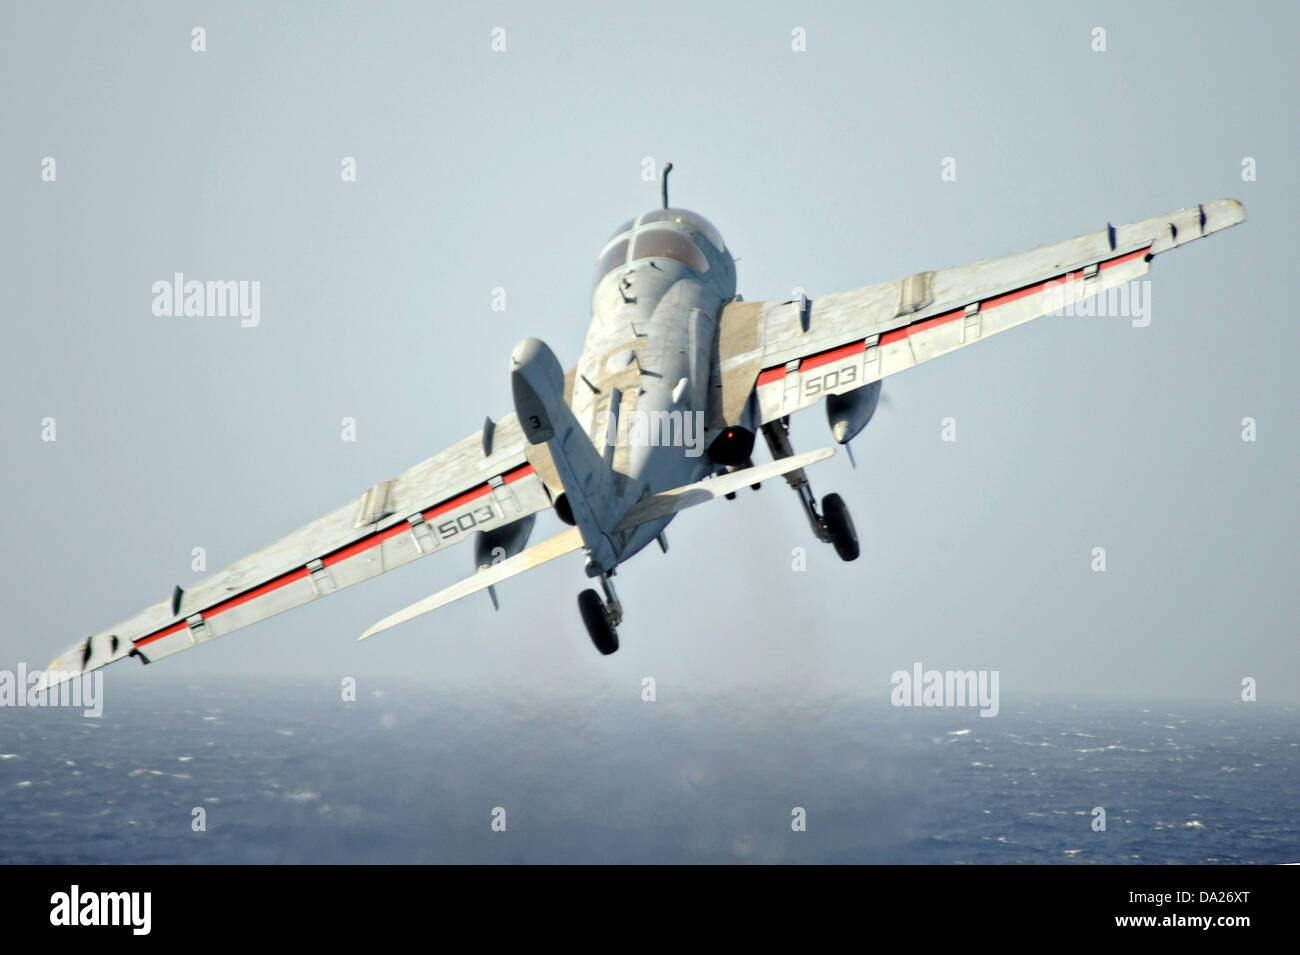 A US Navy EA-6B Prowler Electronic Attack aircraft launches from the aircraft carrier USS Dwight D. Eisenhower June 30, 2013 returning to homeport in Norfolk, VA. Stock Photo